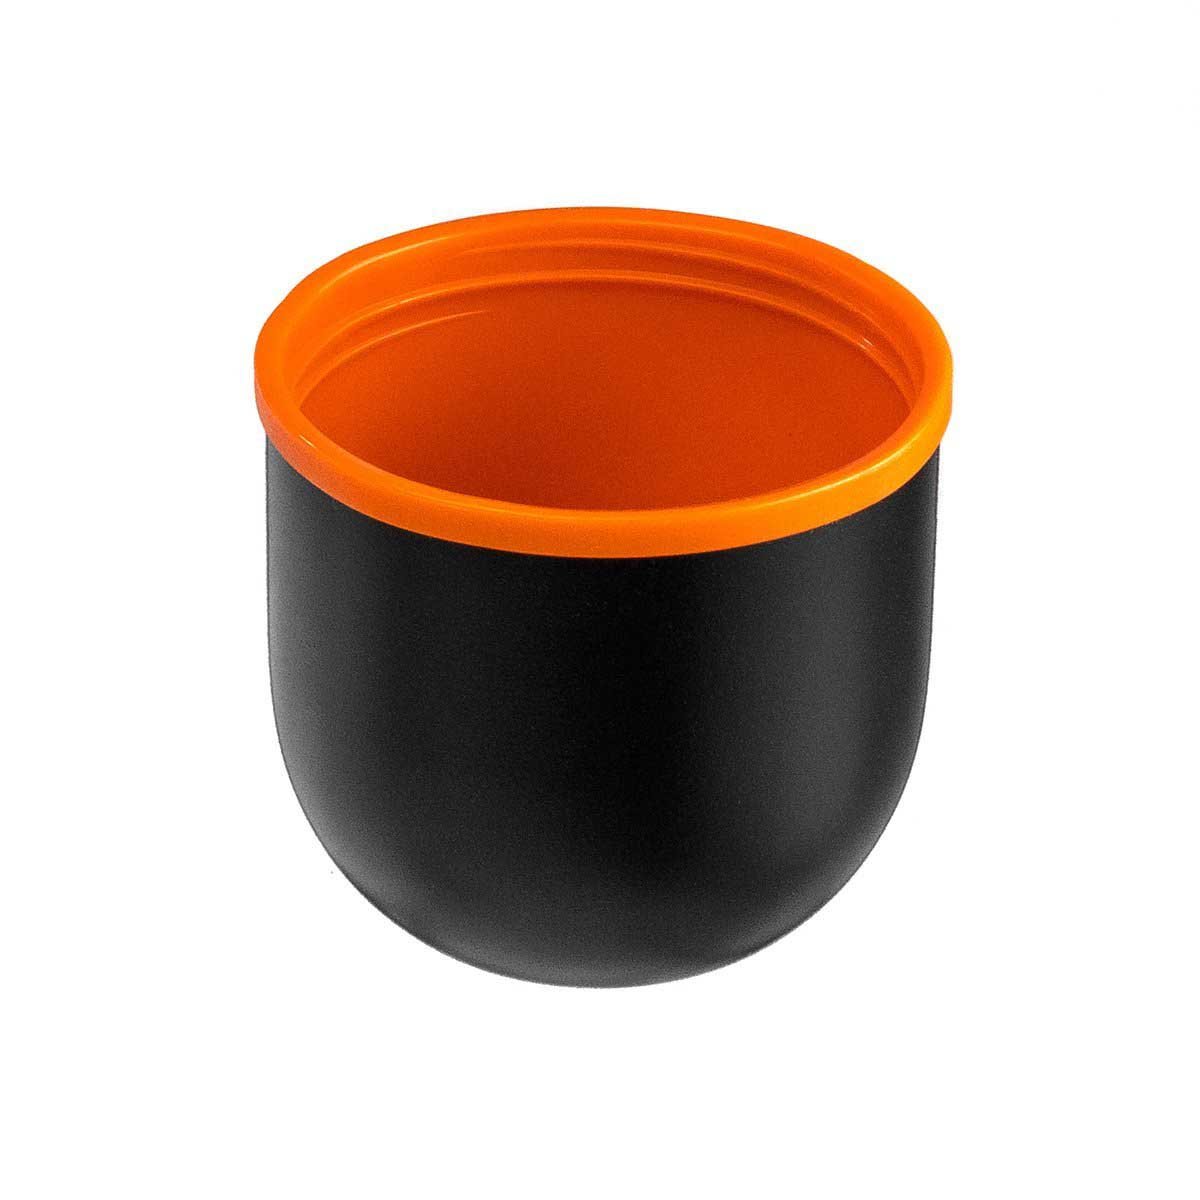 A lid cup